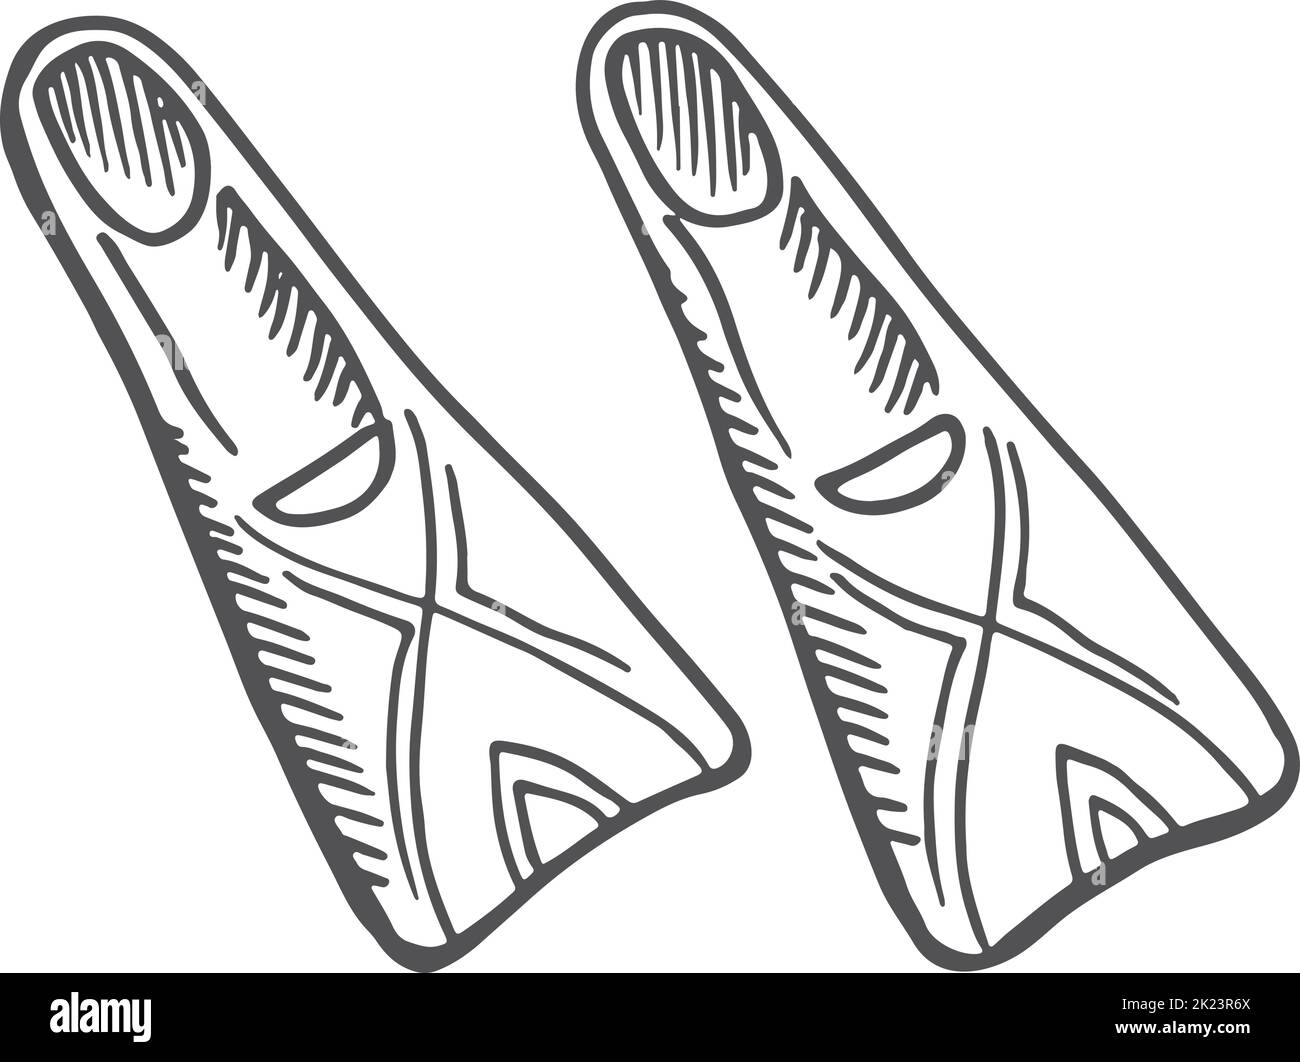 Flippers icon. Hand drawn underwater swimming symbol Stock Vector